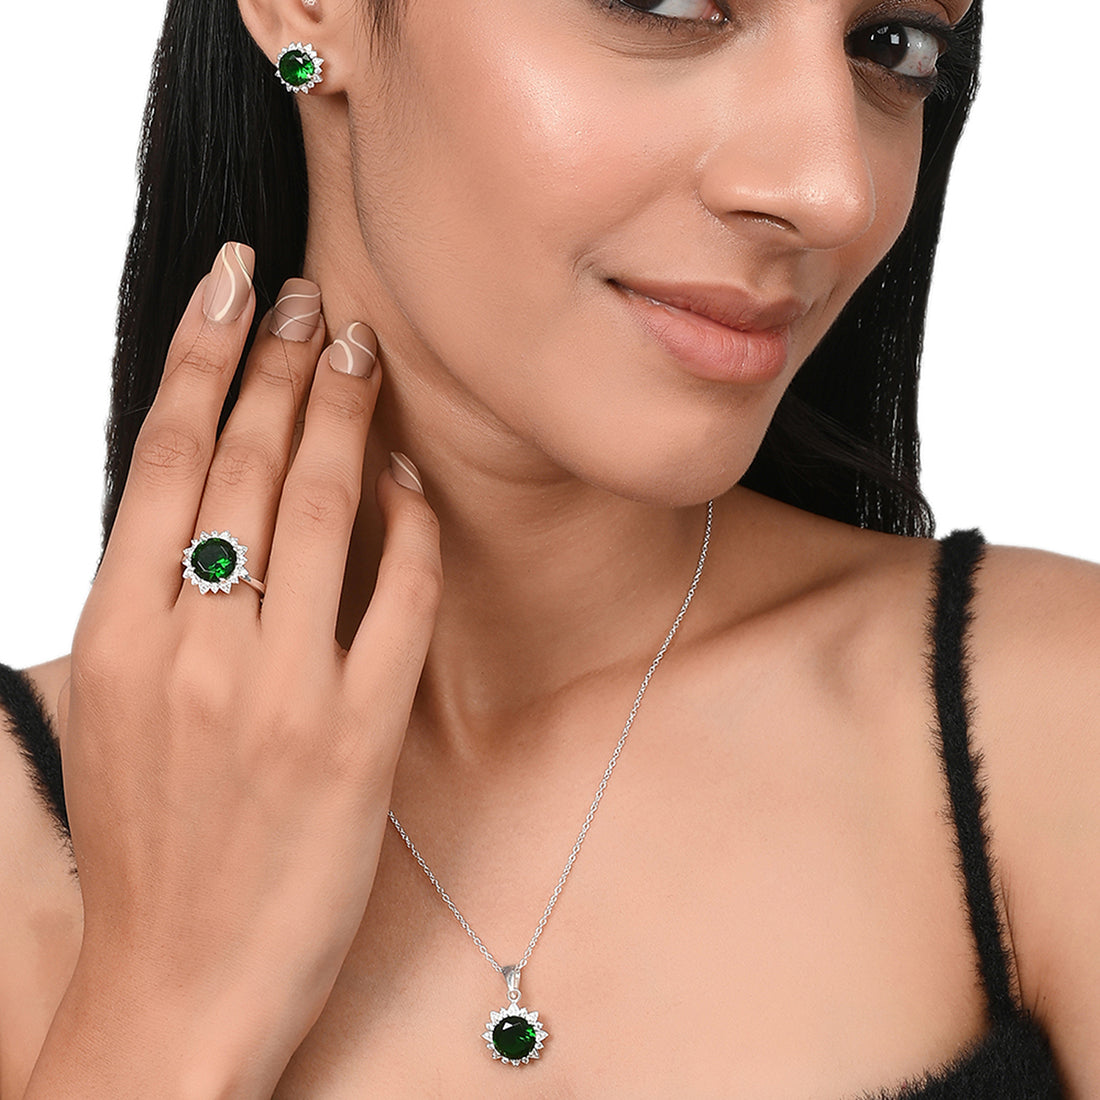 925 Sterling Silver Box Set With Floral Green CZ gems For Women